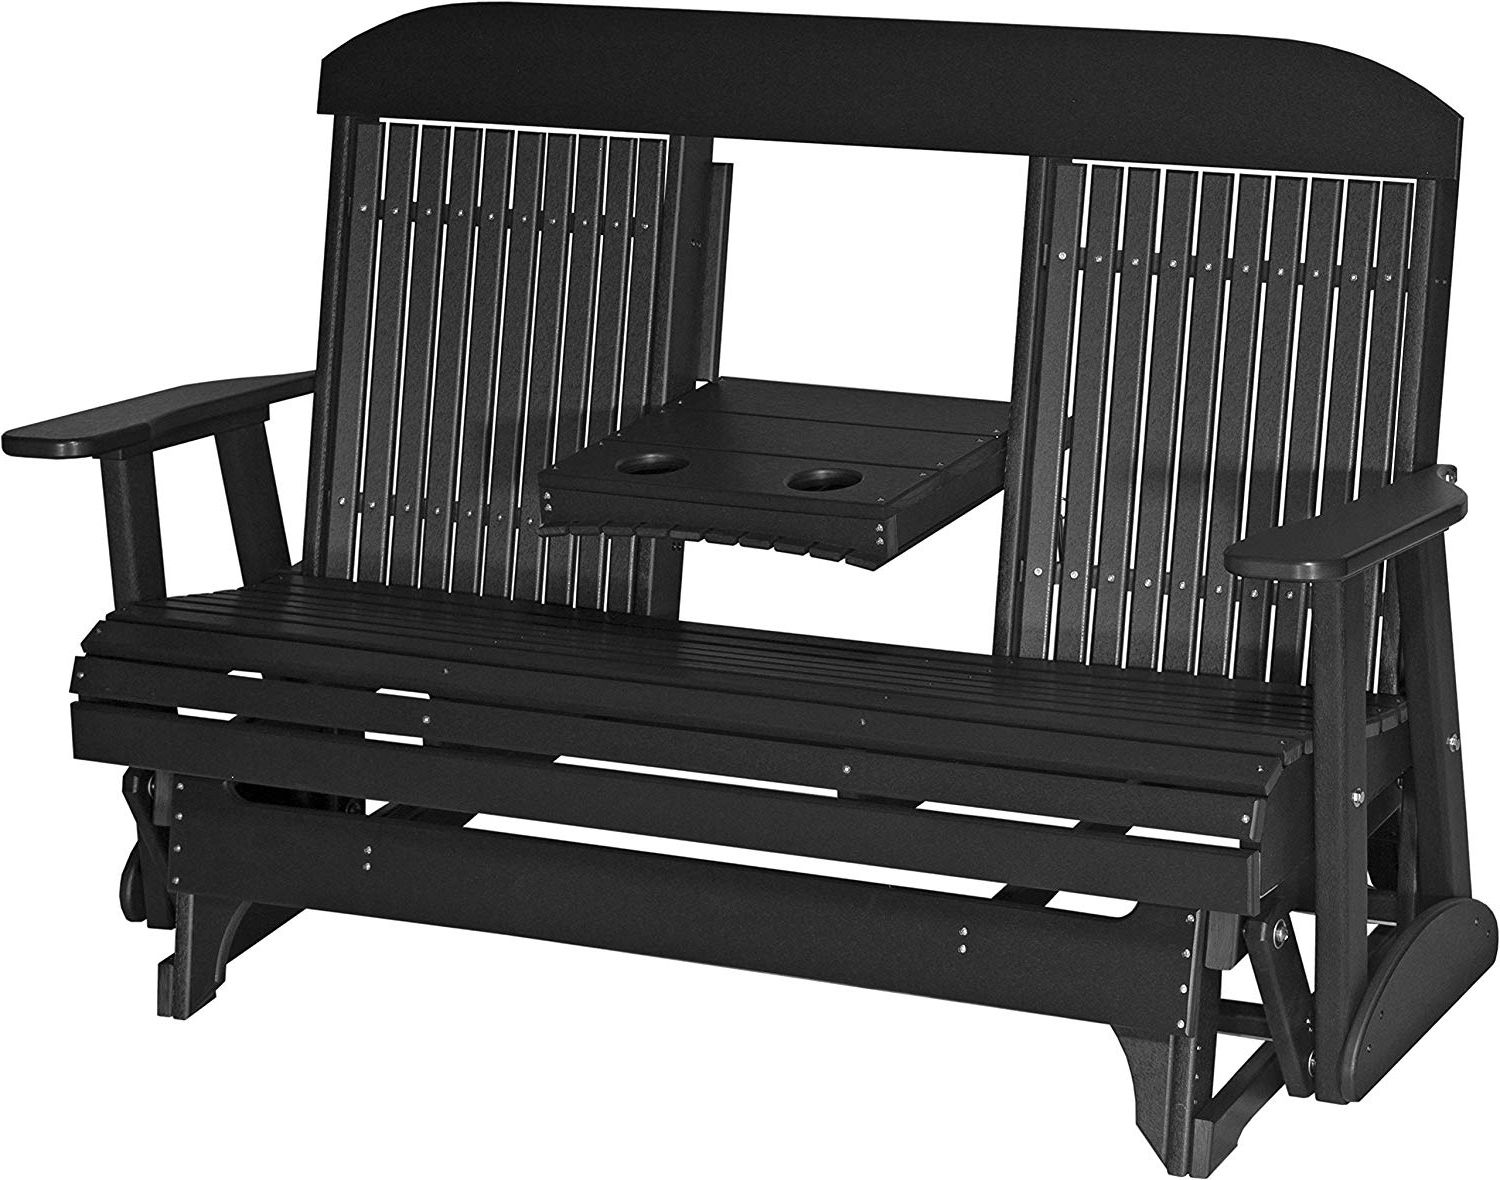 Amazon : Luxcraft Poly Lumber Classic Highback 5ft With Regard To Widely Used Classic Adirondack Glider Benches (View 5 of 30)